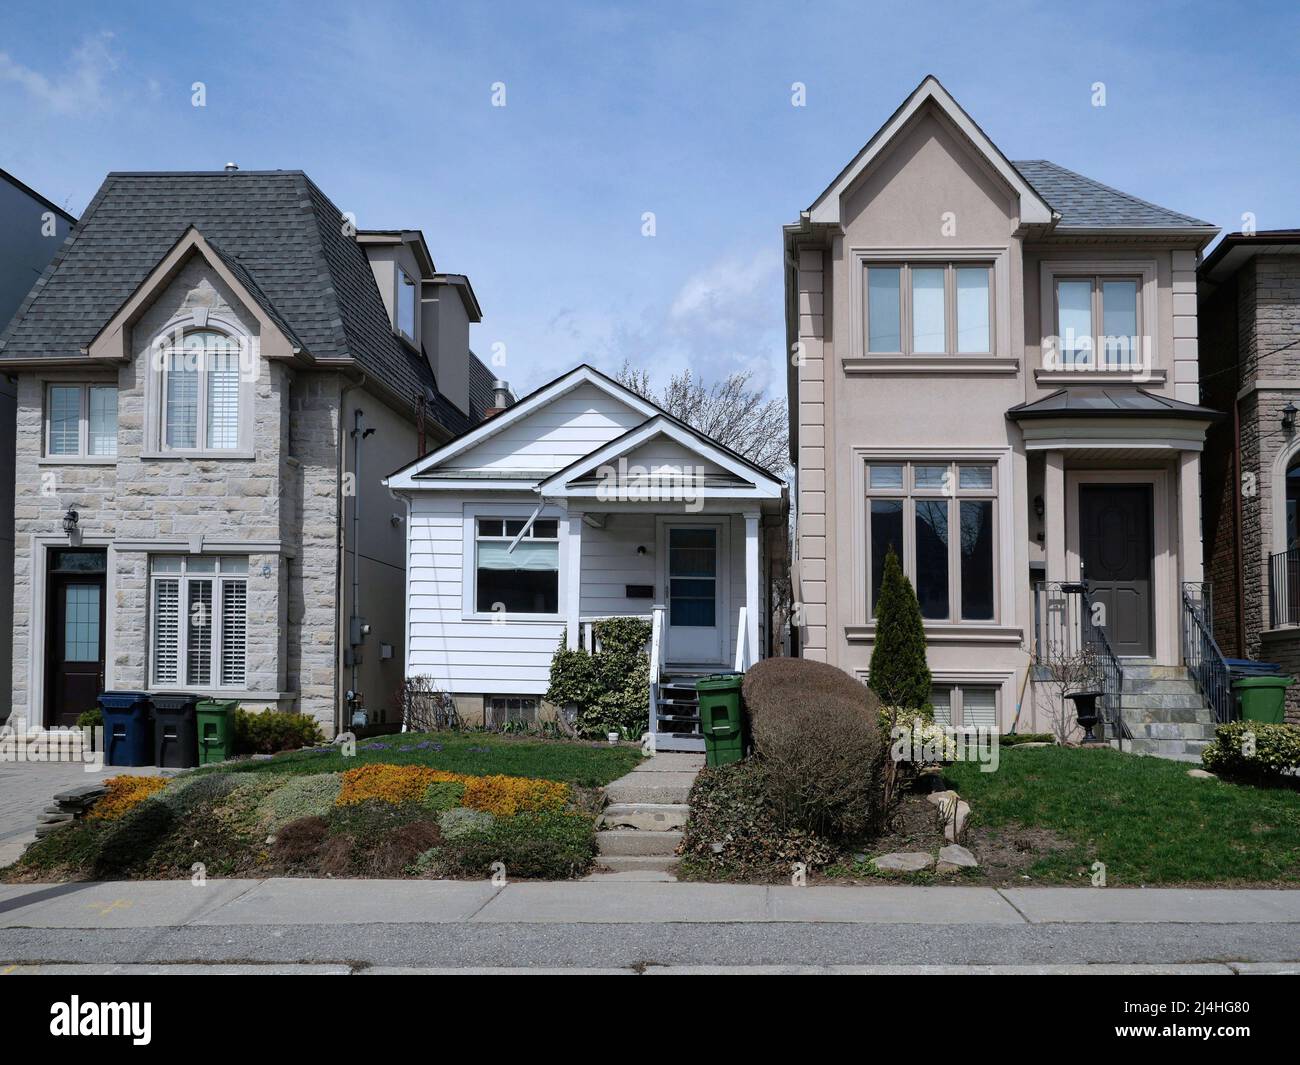 Gentrification in a residential neighborhood, with small homes replaced by larger two story houses Stock Photo